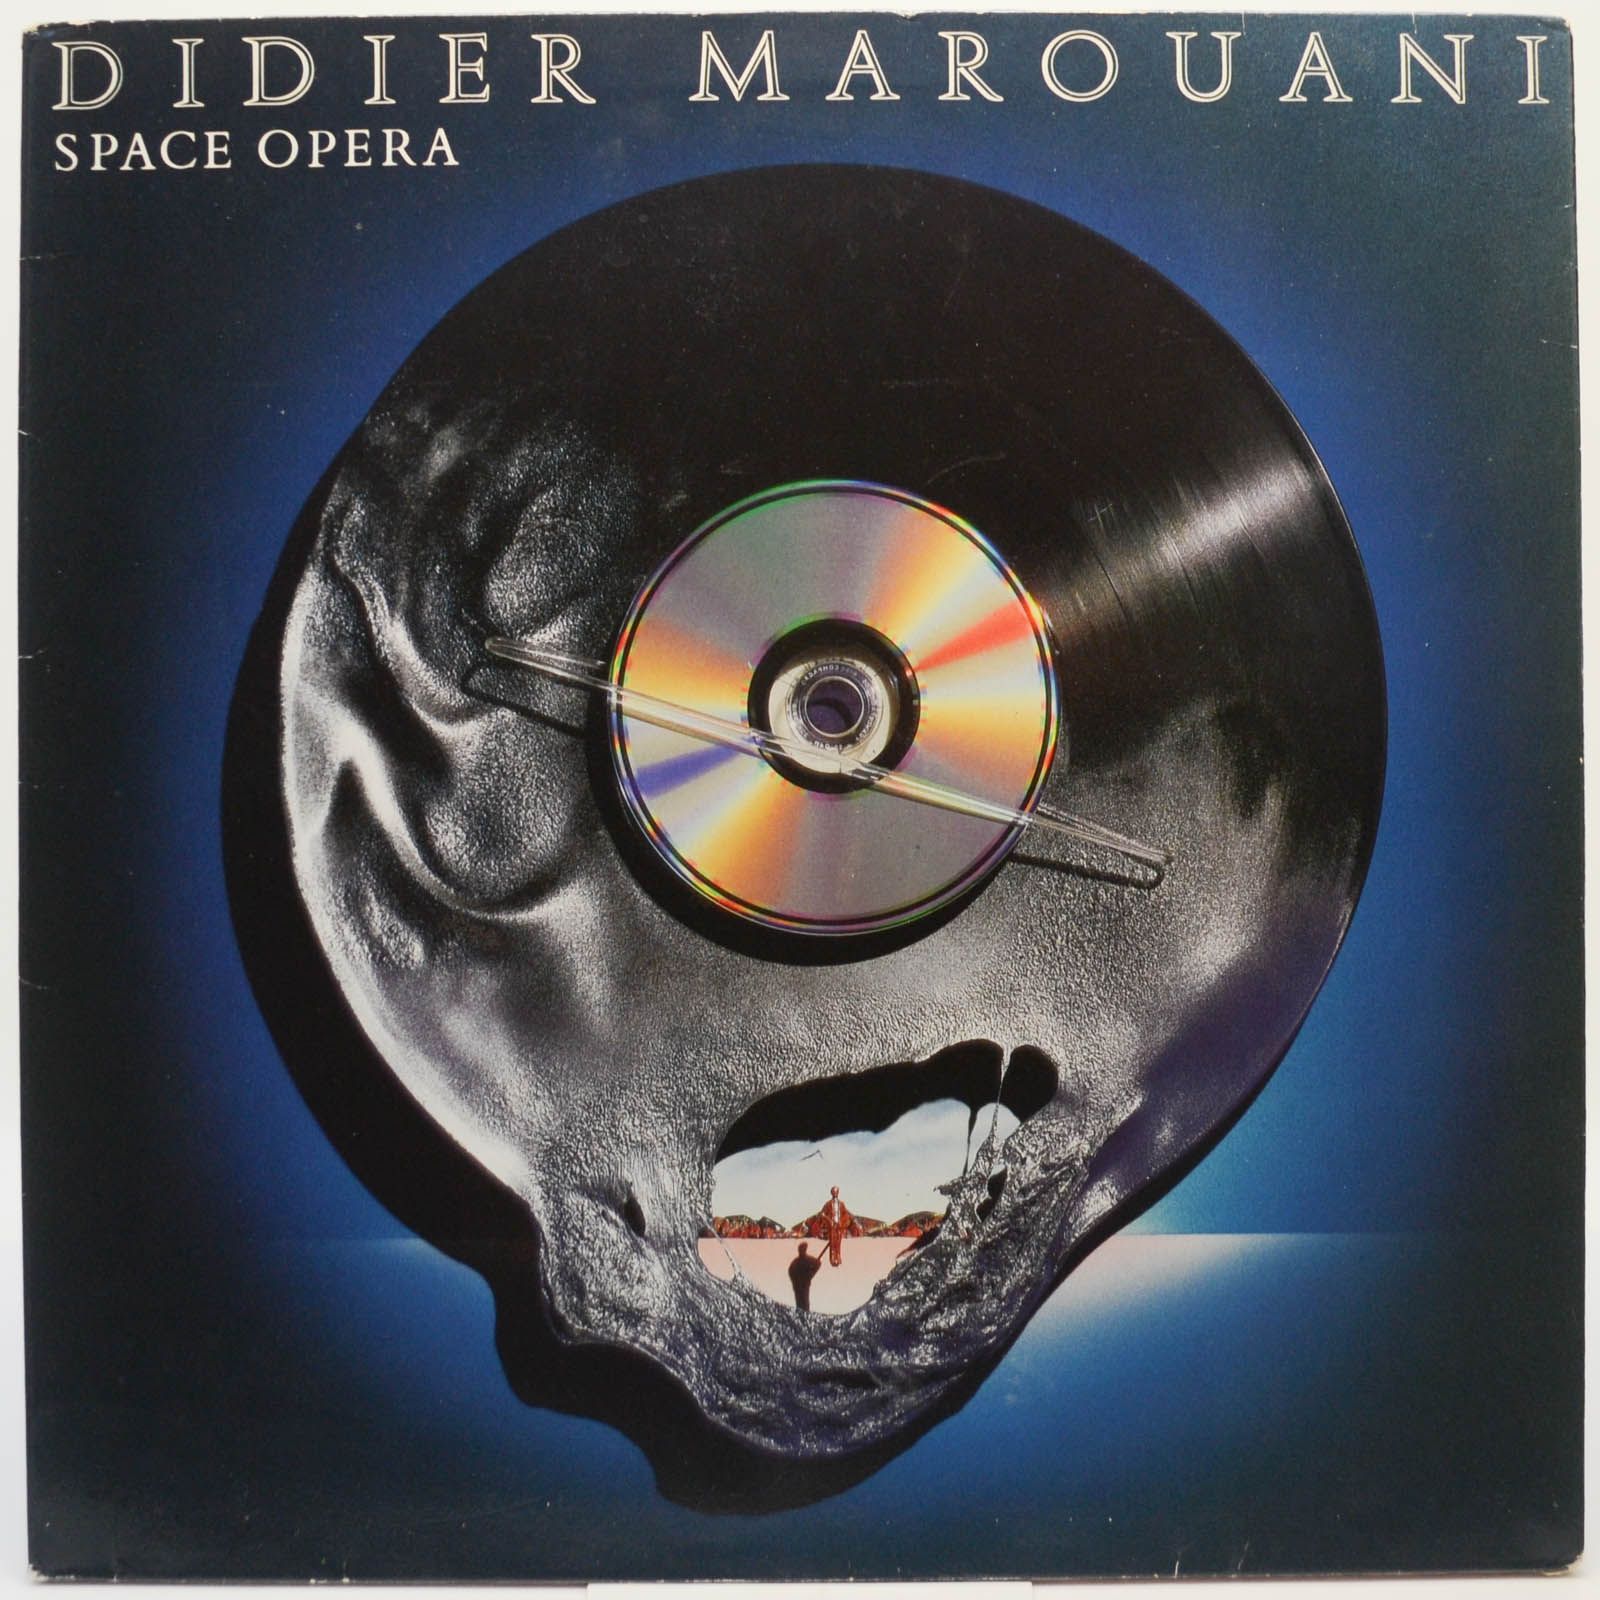 Didier Marouani — Space Opera (France), 1987